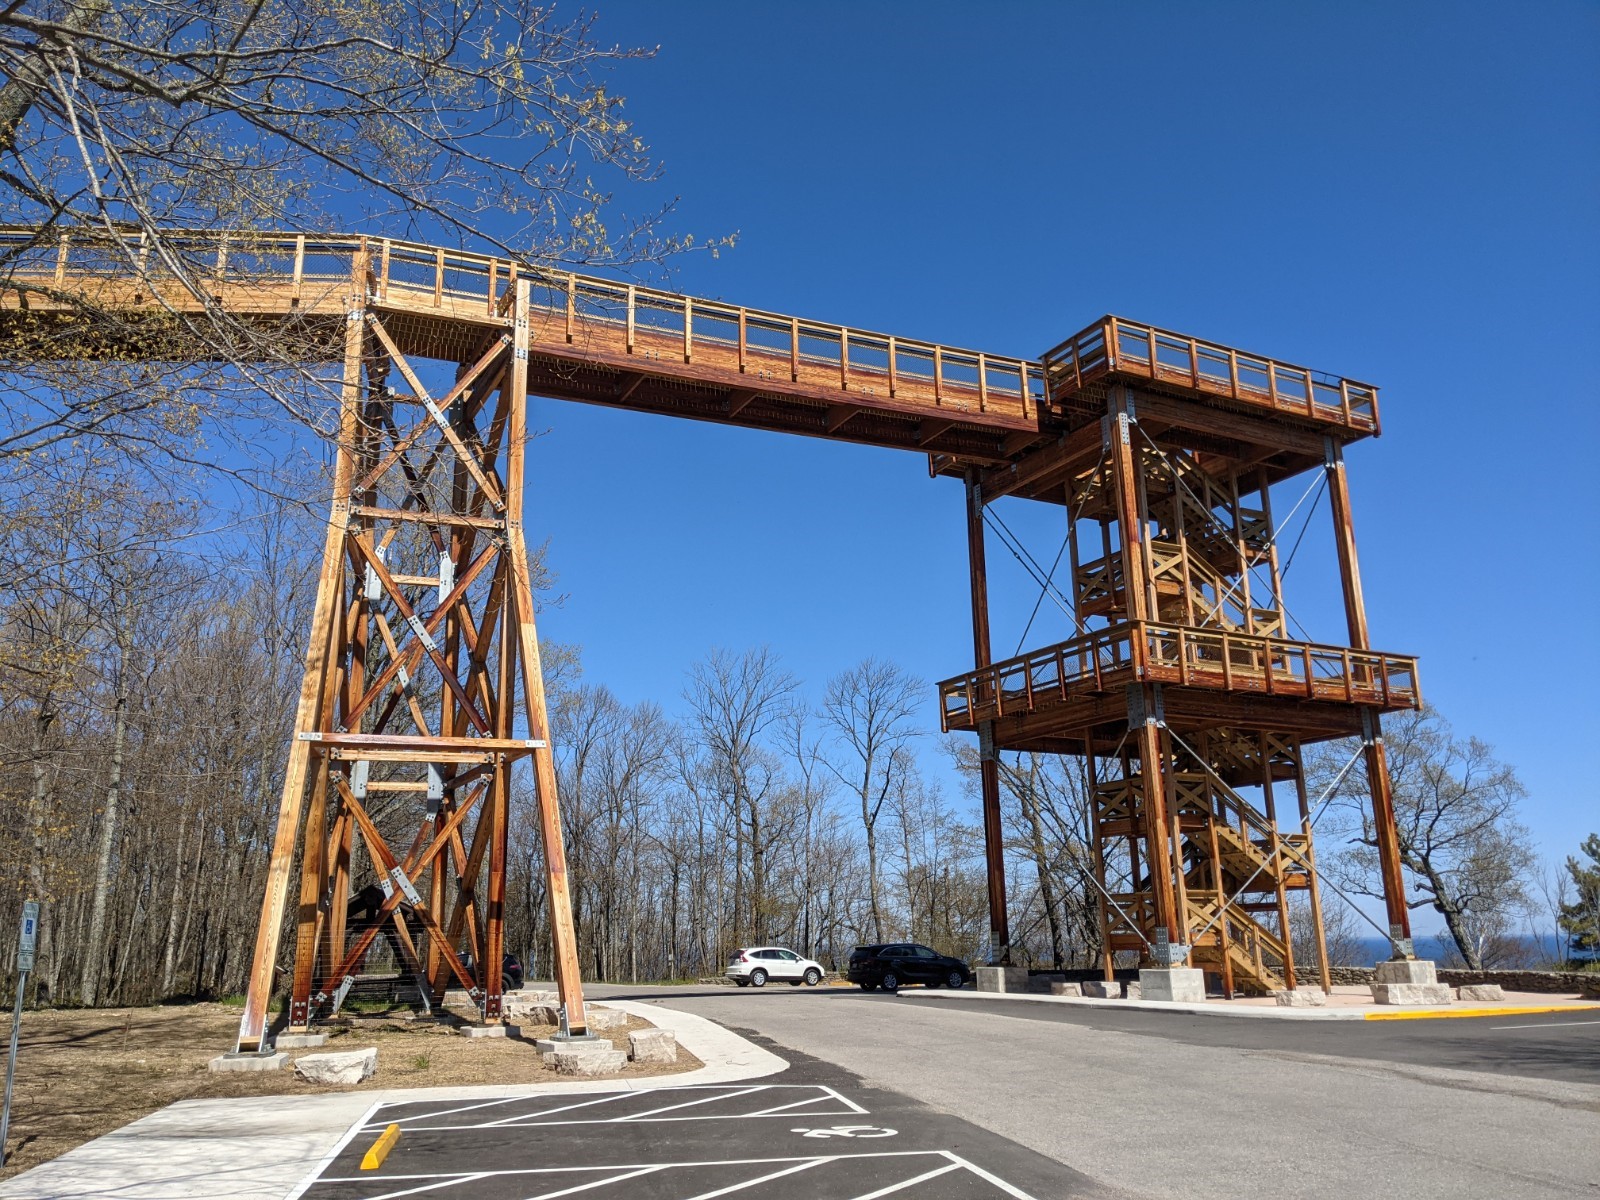 Peninsula State Park Prepares For Summer With Upgrades, Opening Of Eagle Tower